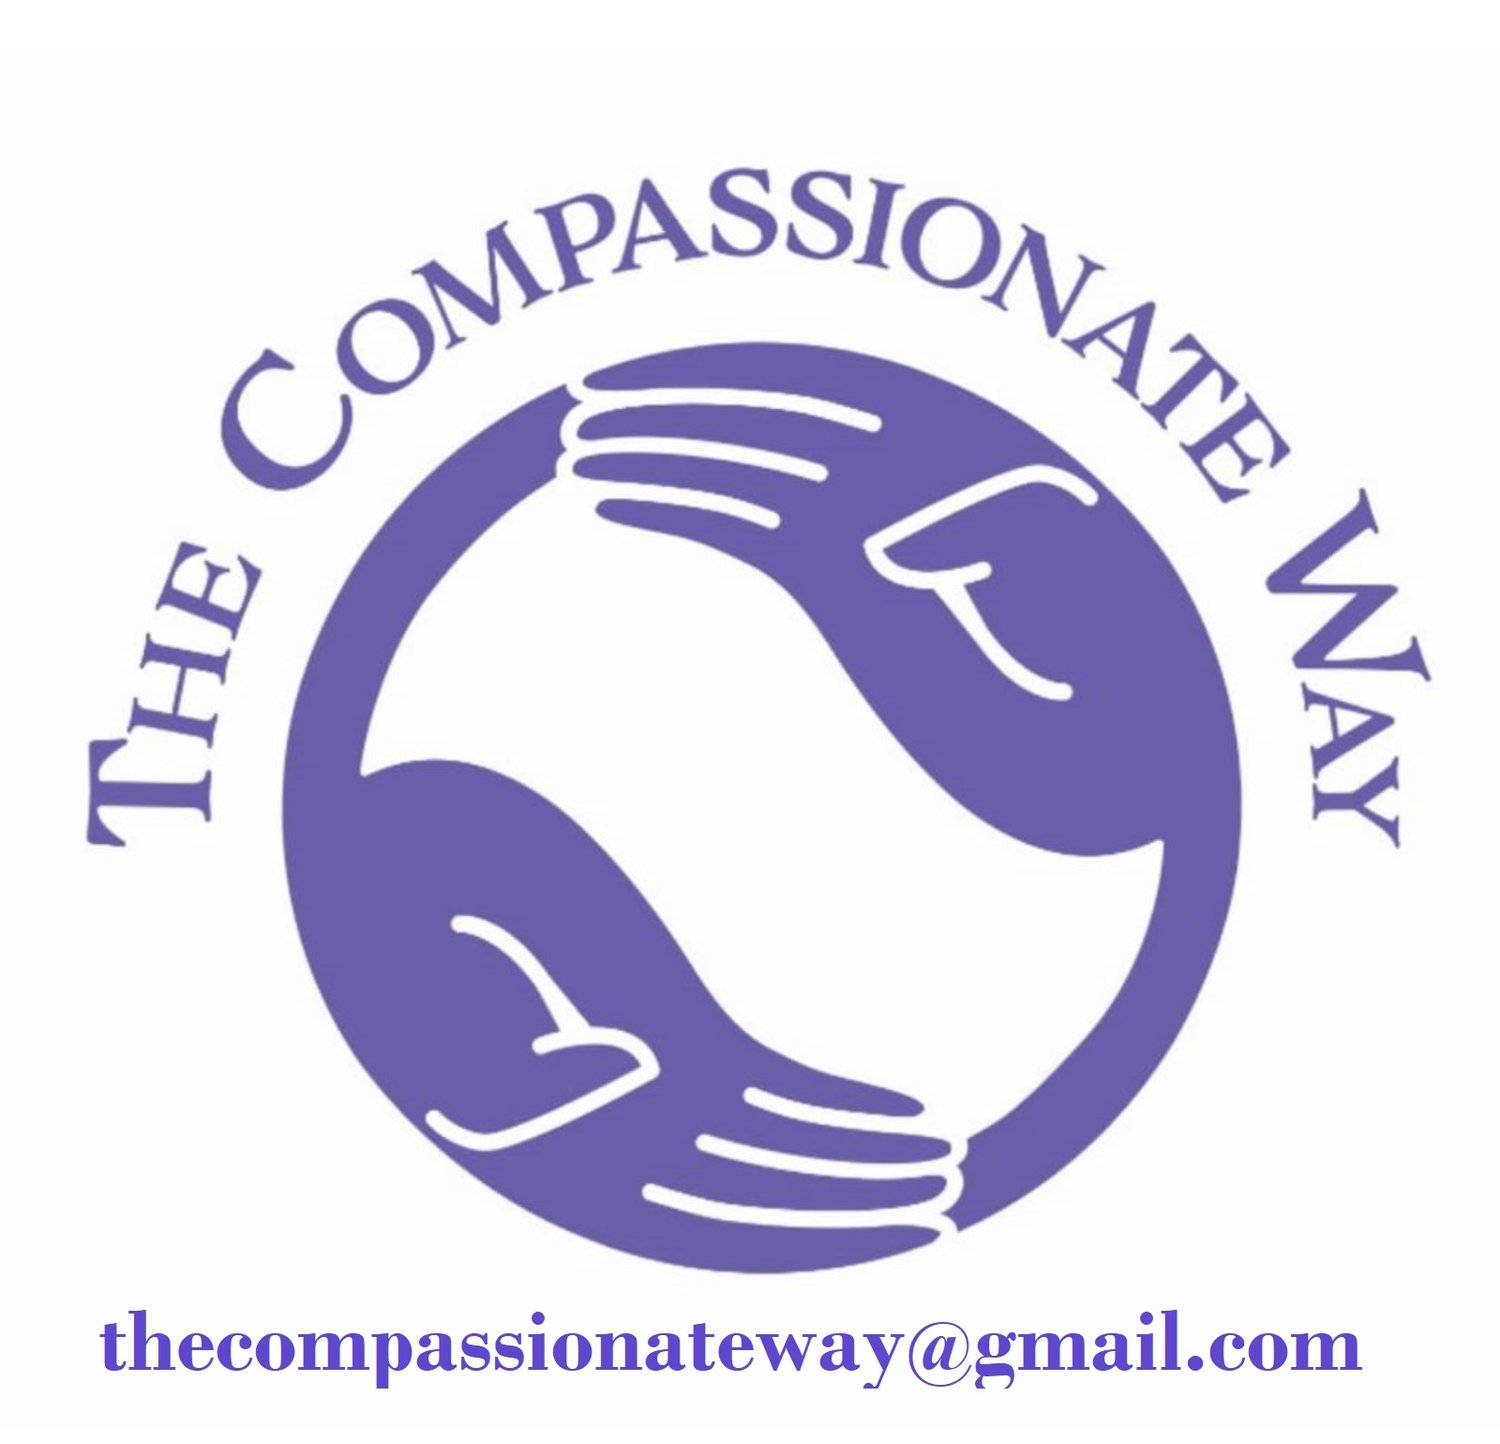 The Compassionate Way